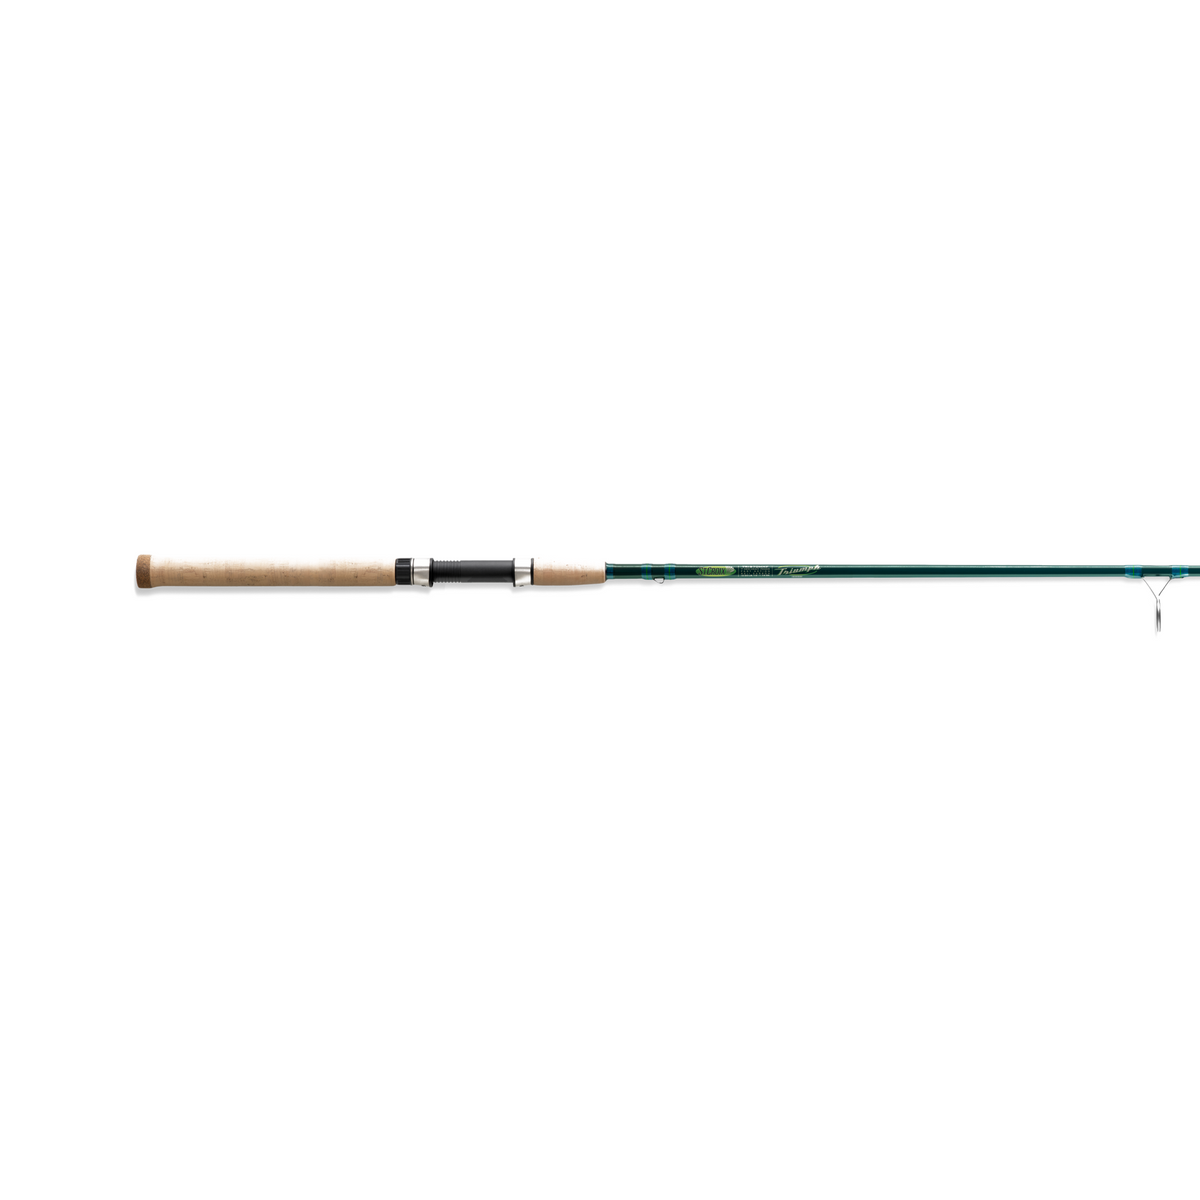 St. Croix Sole Saltwater Spinning Rod & Reel Combo 3500 7'0